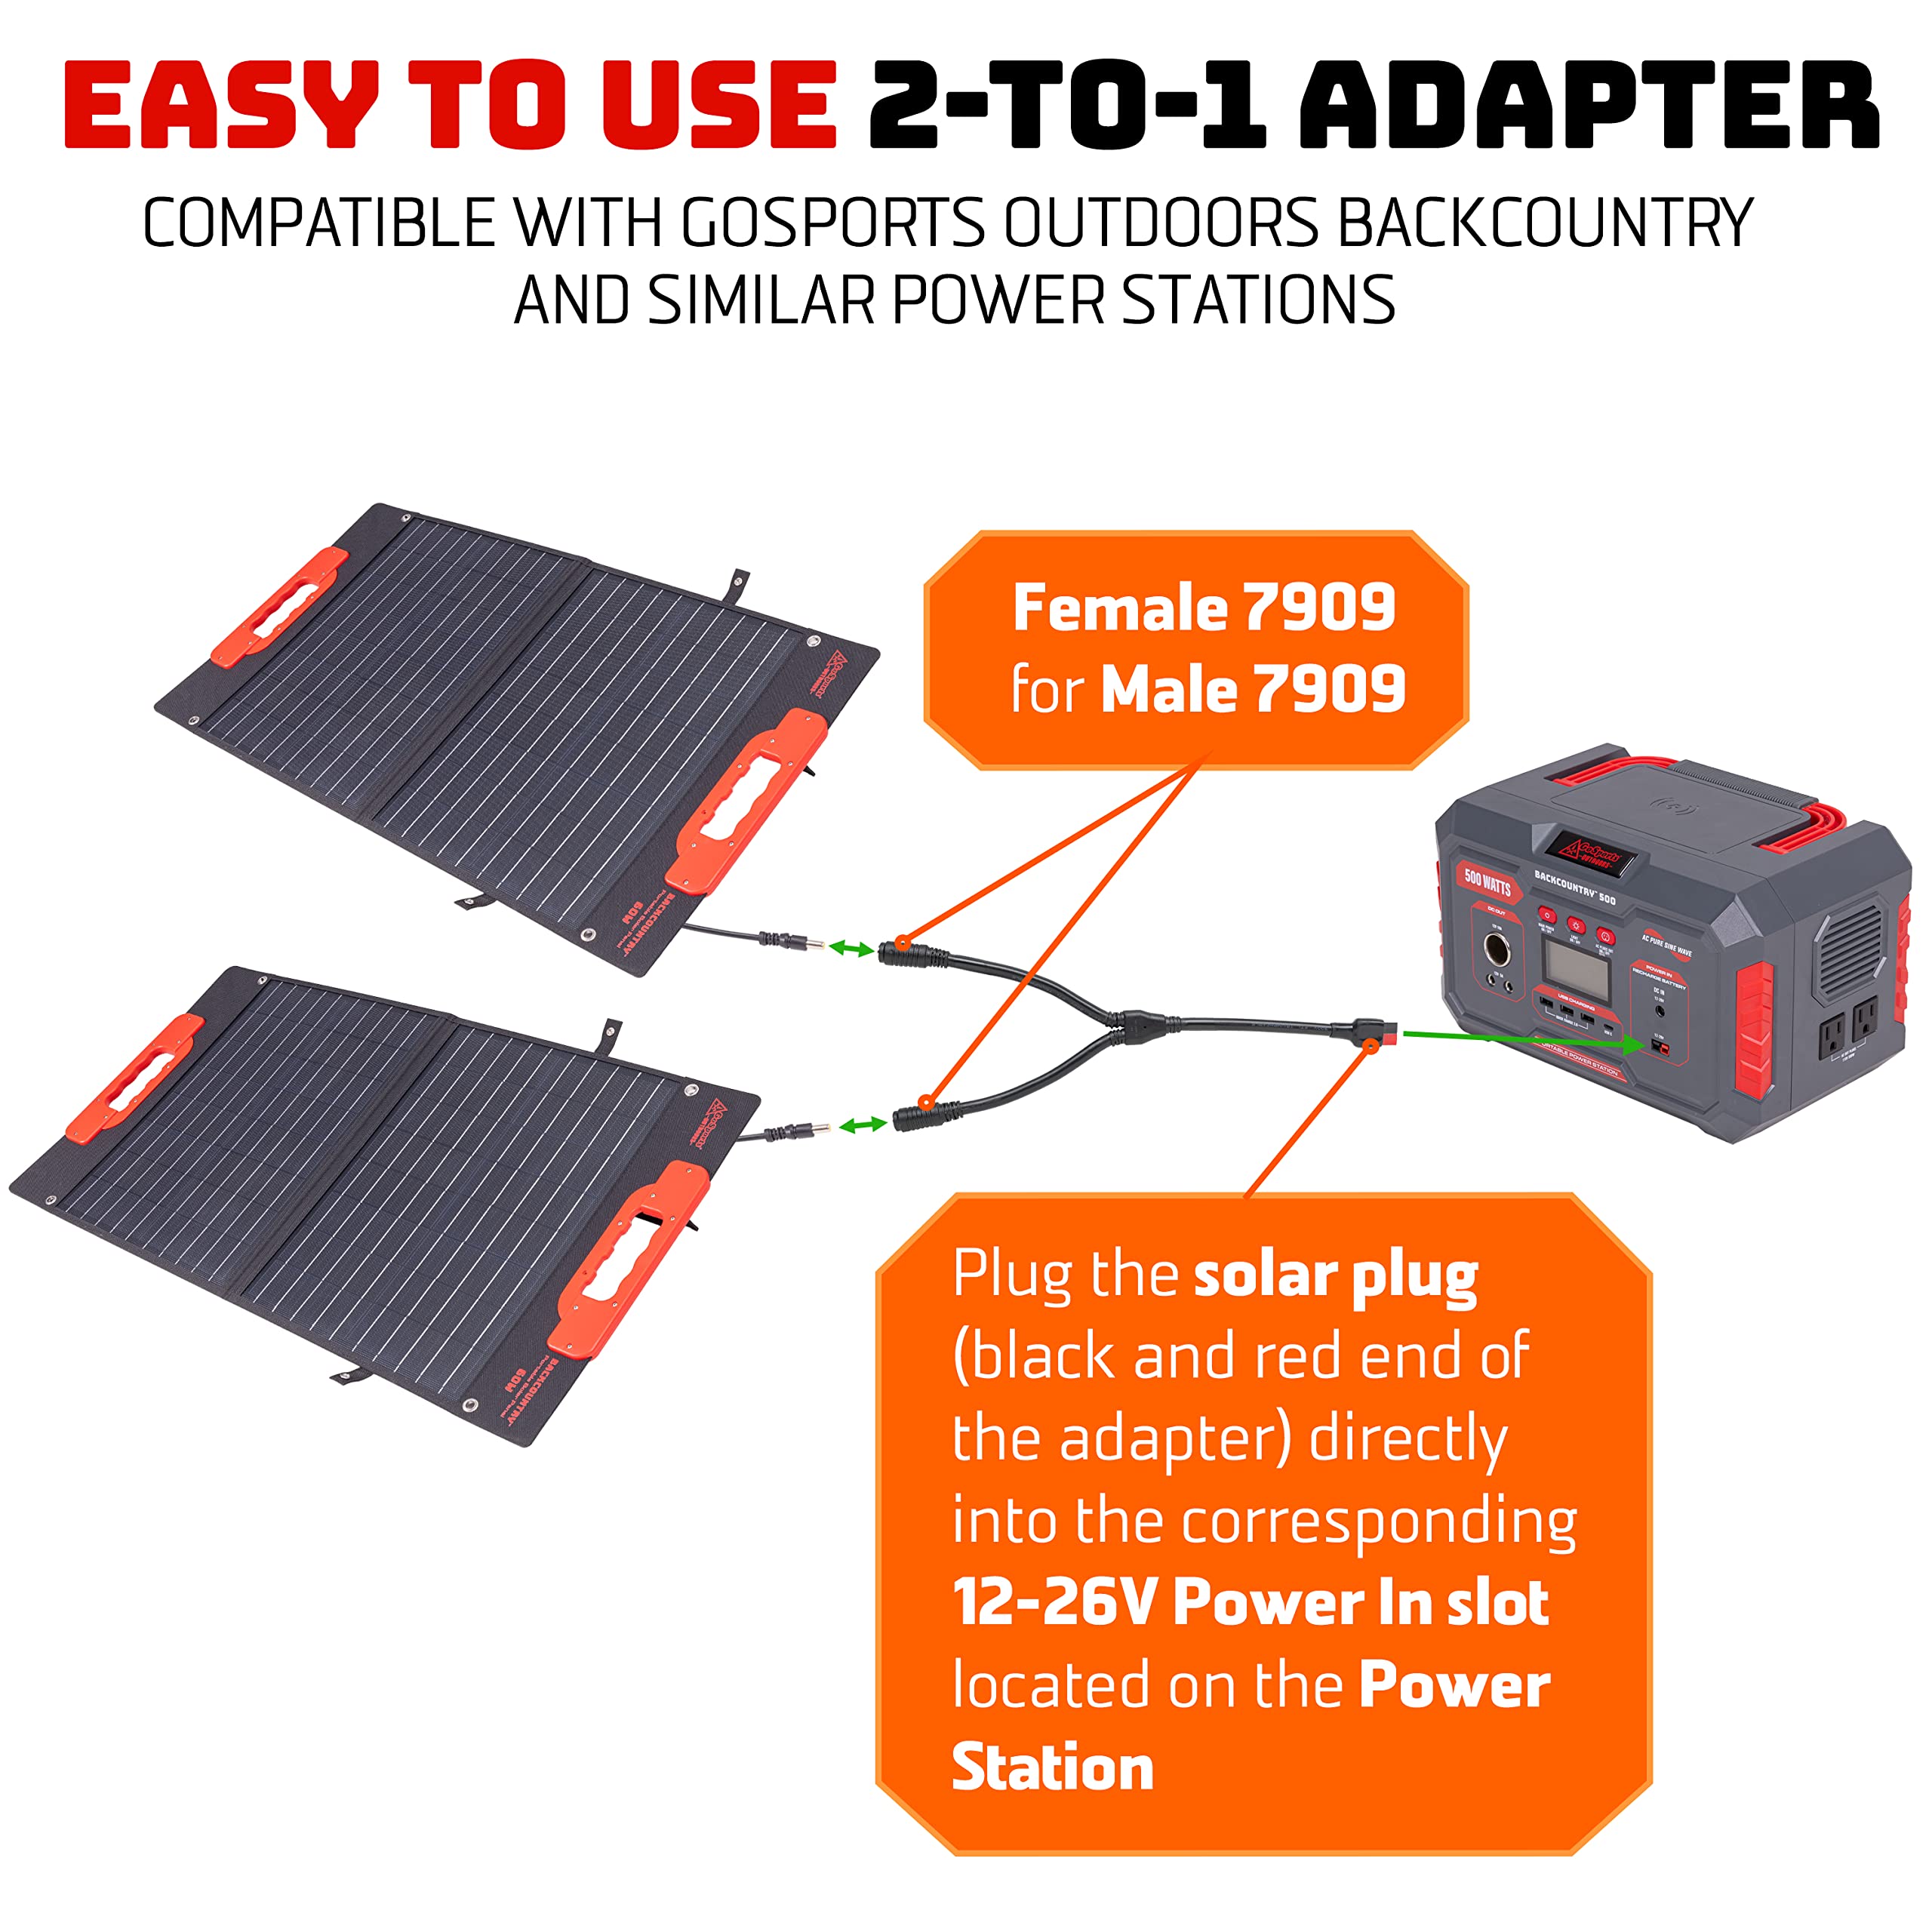 GoSports Outdoors Backcountry 2-to-1 Solar Dongle Y Adapter, Use to Recharge Power Station with 2 Solar Panels at Once